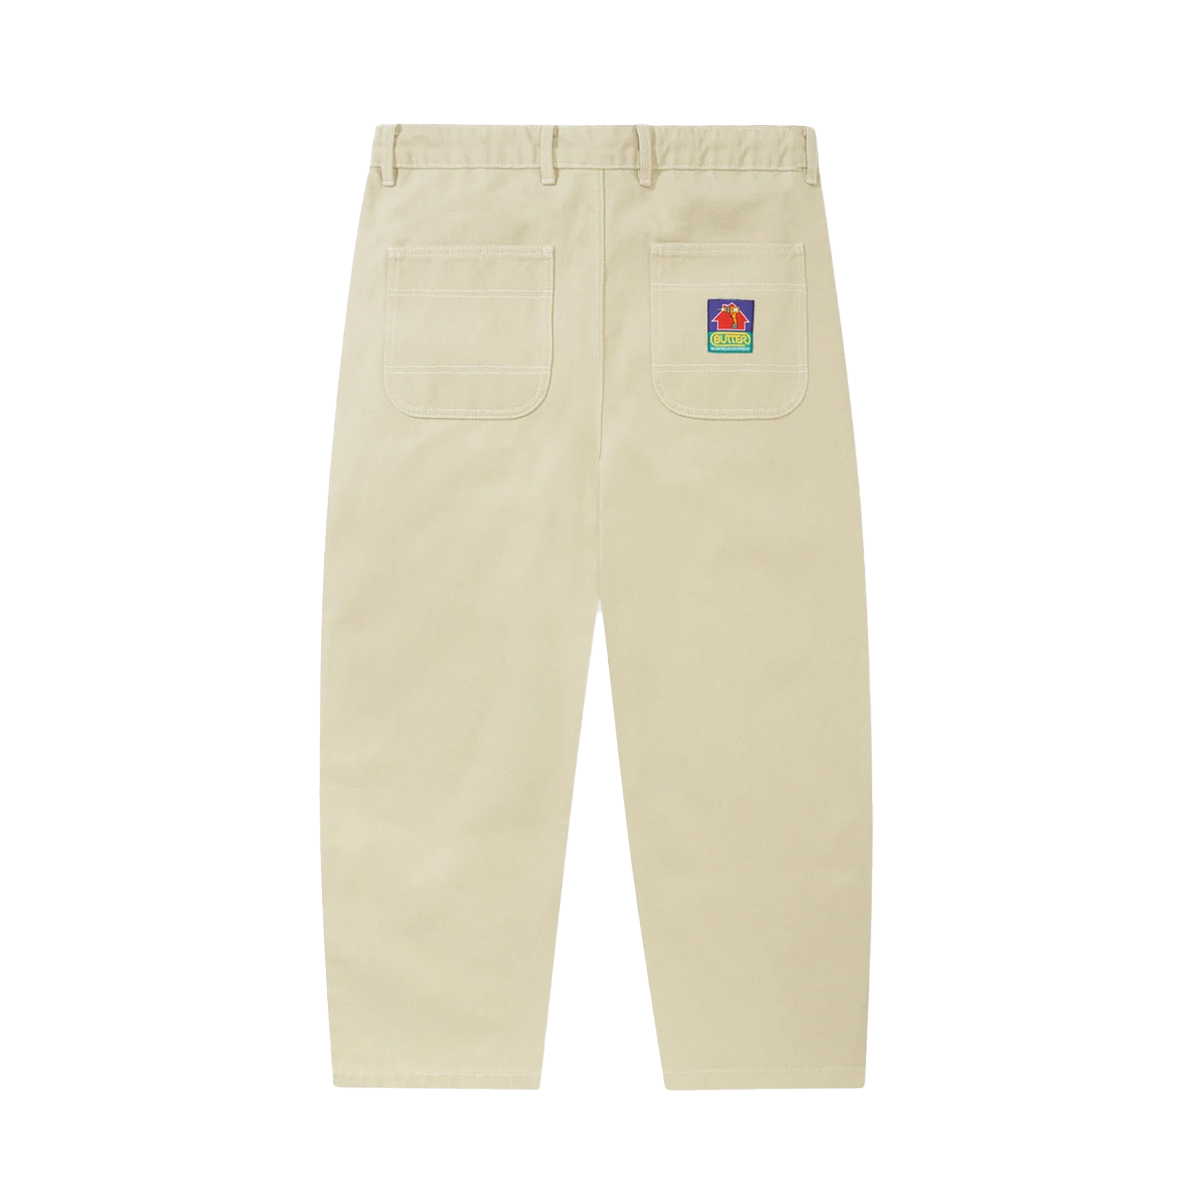 Butter Work Double Knee Pants - Washed Khaki